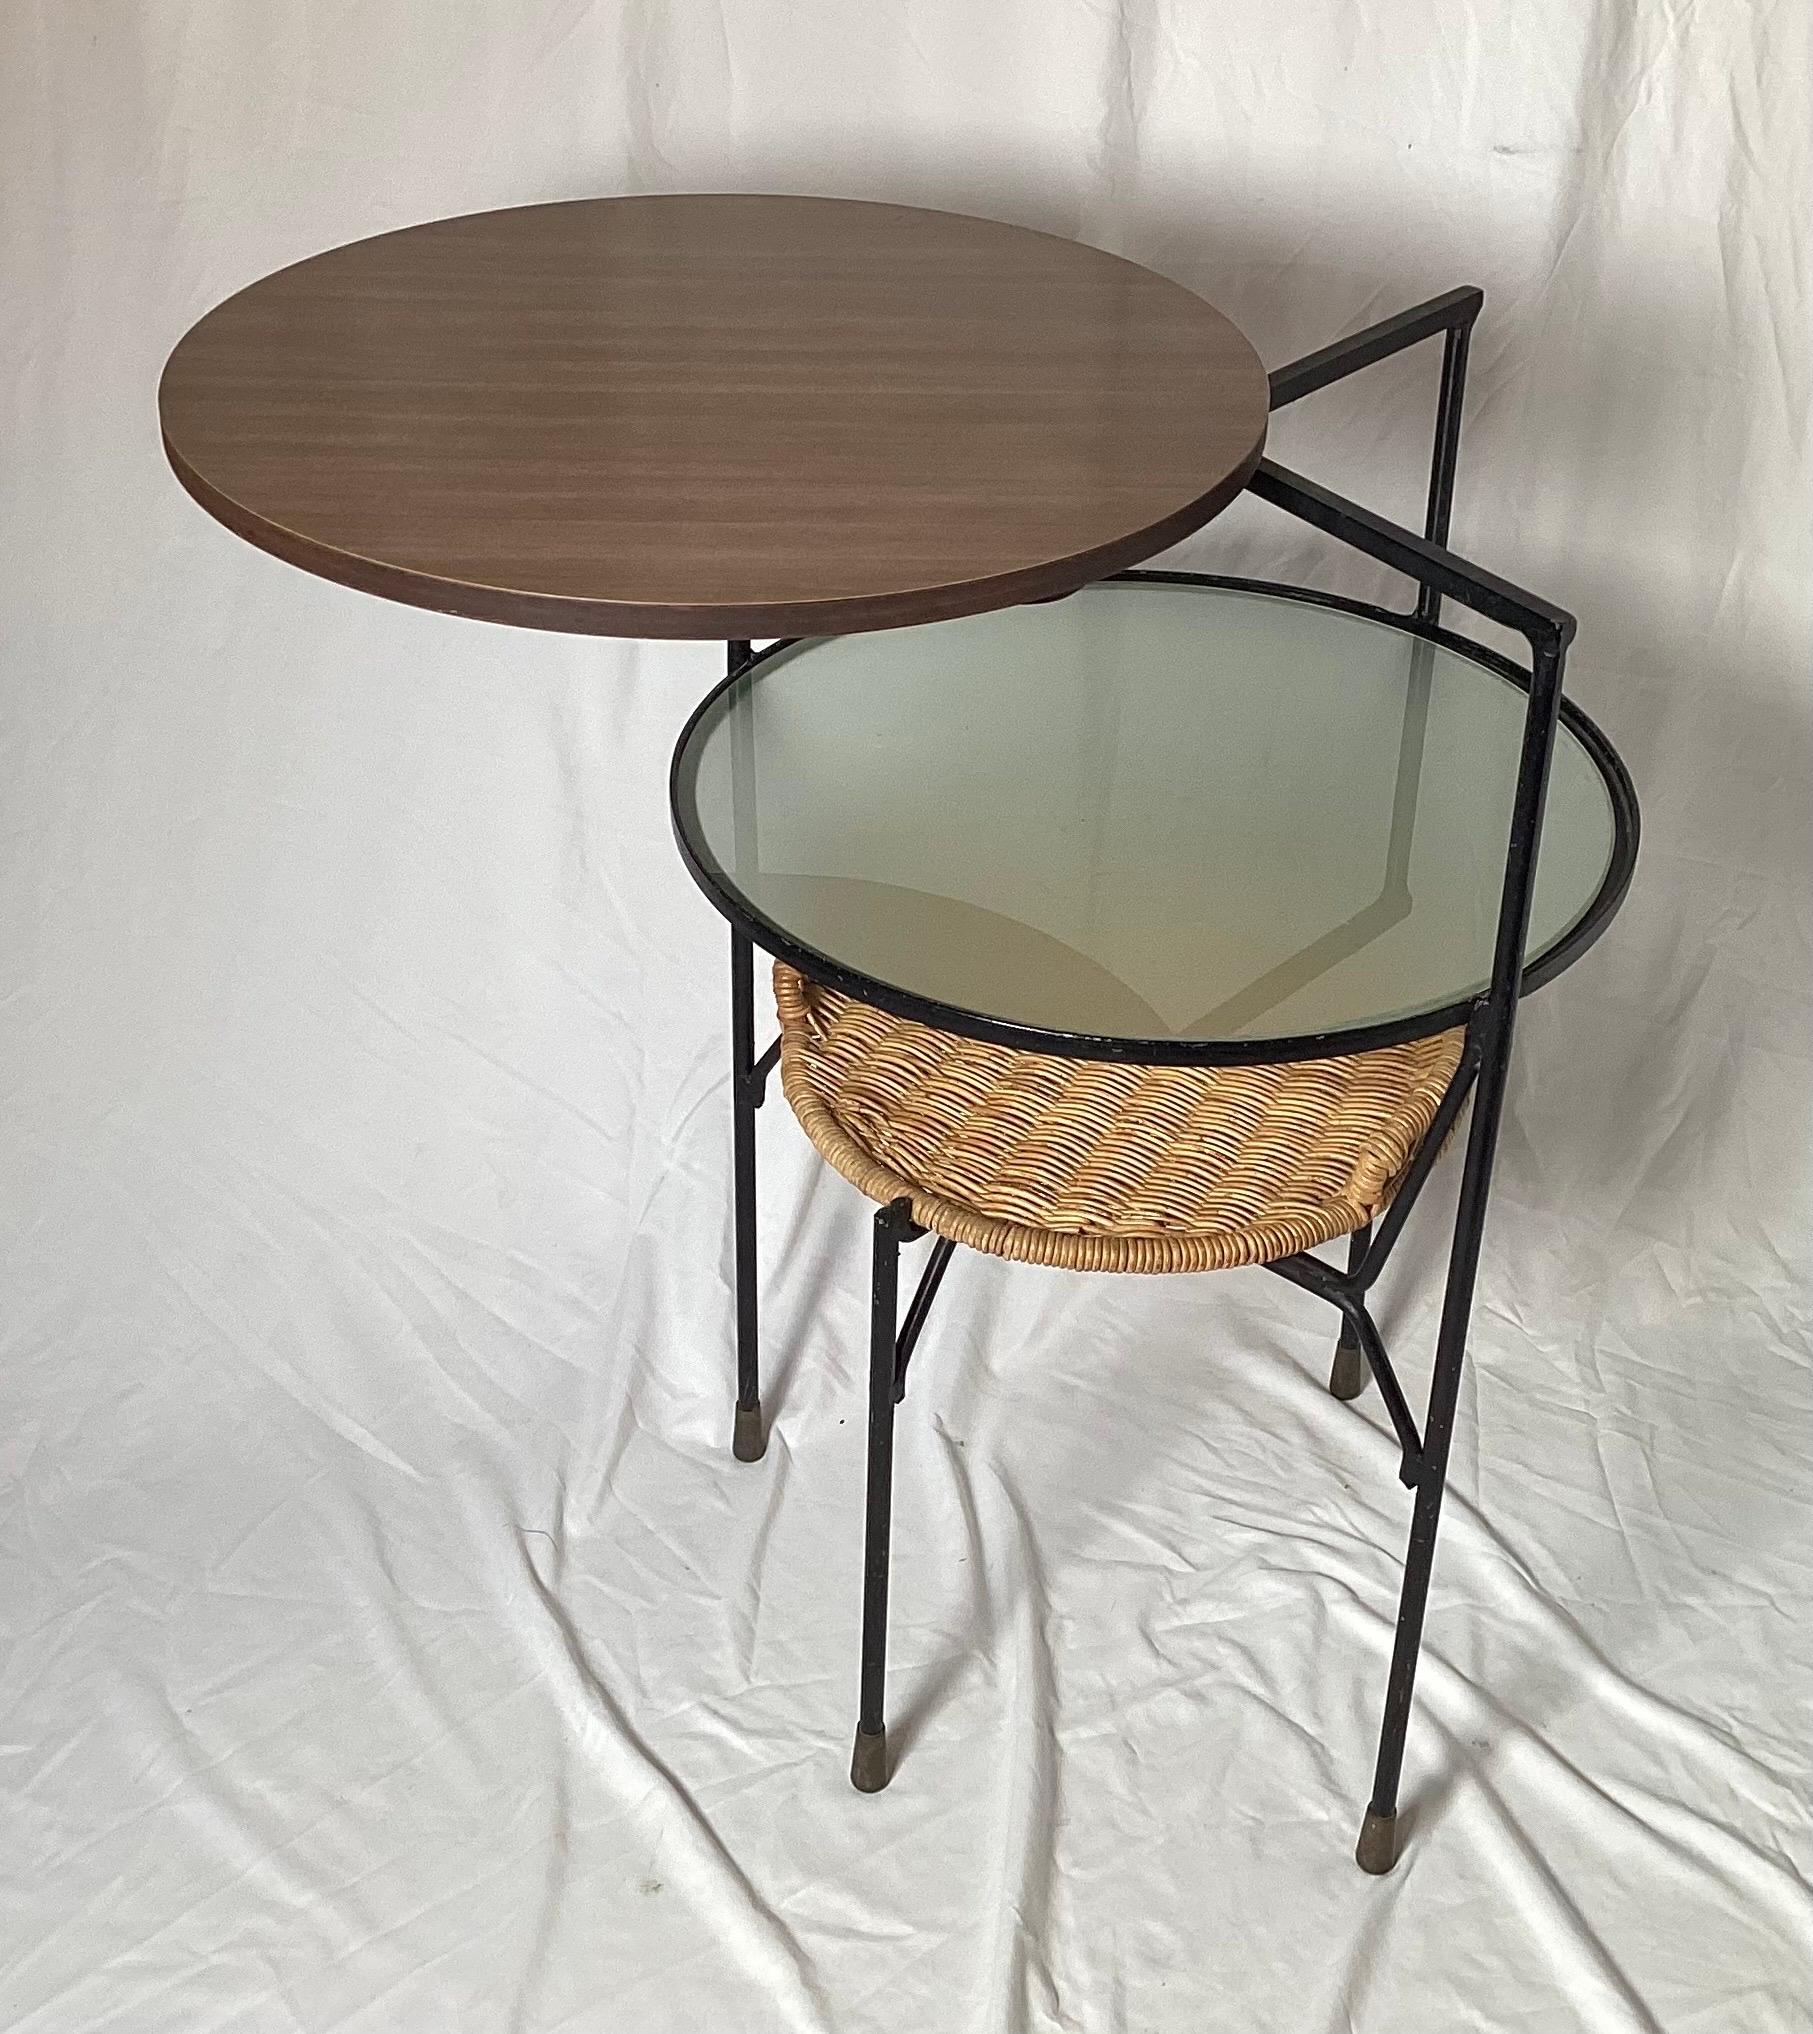 A three tiered round 1970's swivel top table, the first tier in Formica, the middle tier in frosted glass and the lower is hand woven wicker tray. The top which swivels outward. Very good original condition. Measures: 31 high, 20 inches in diameter.